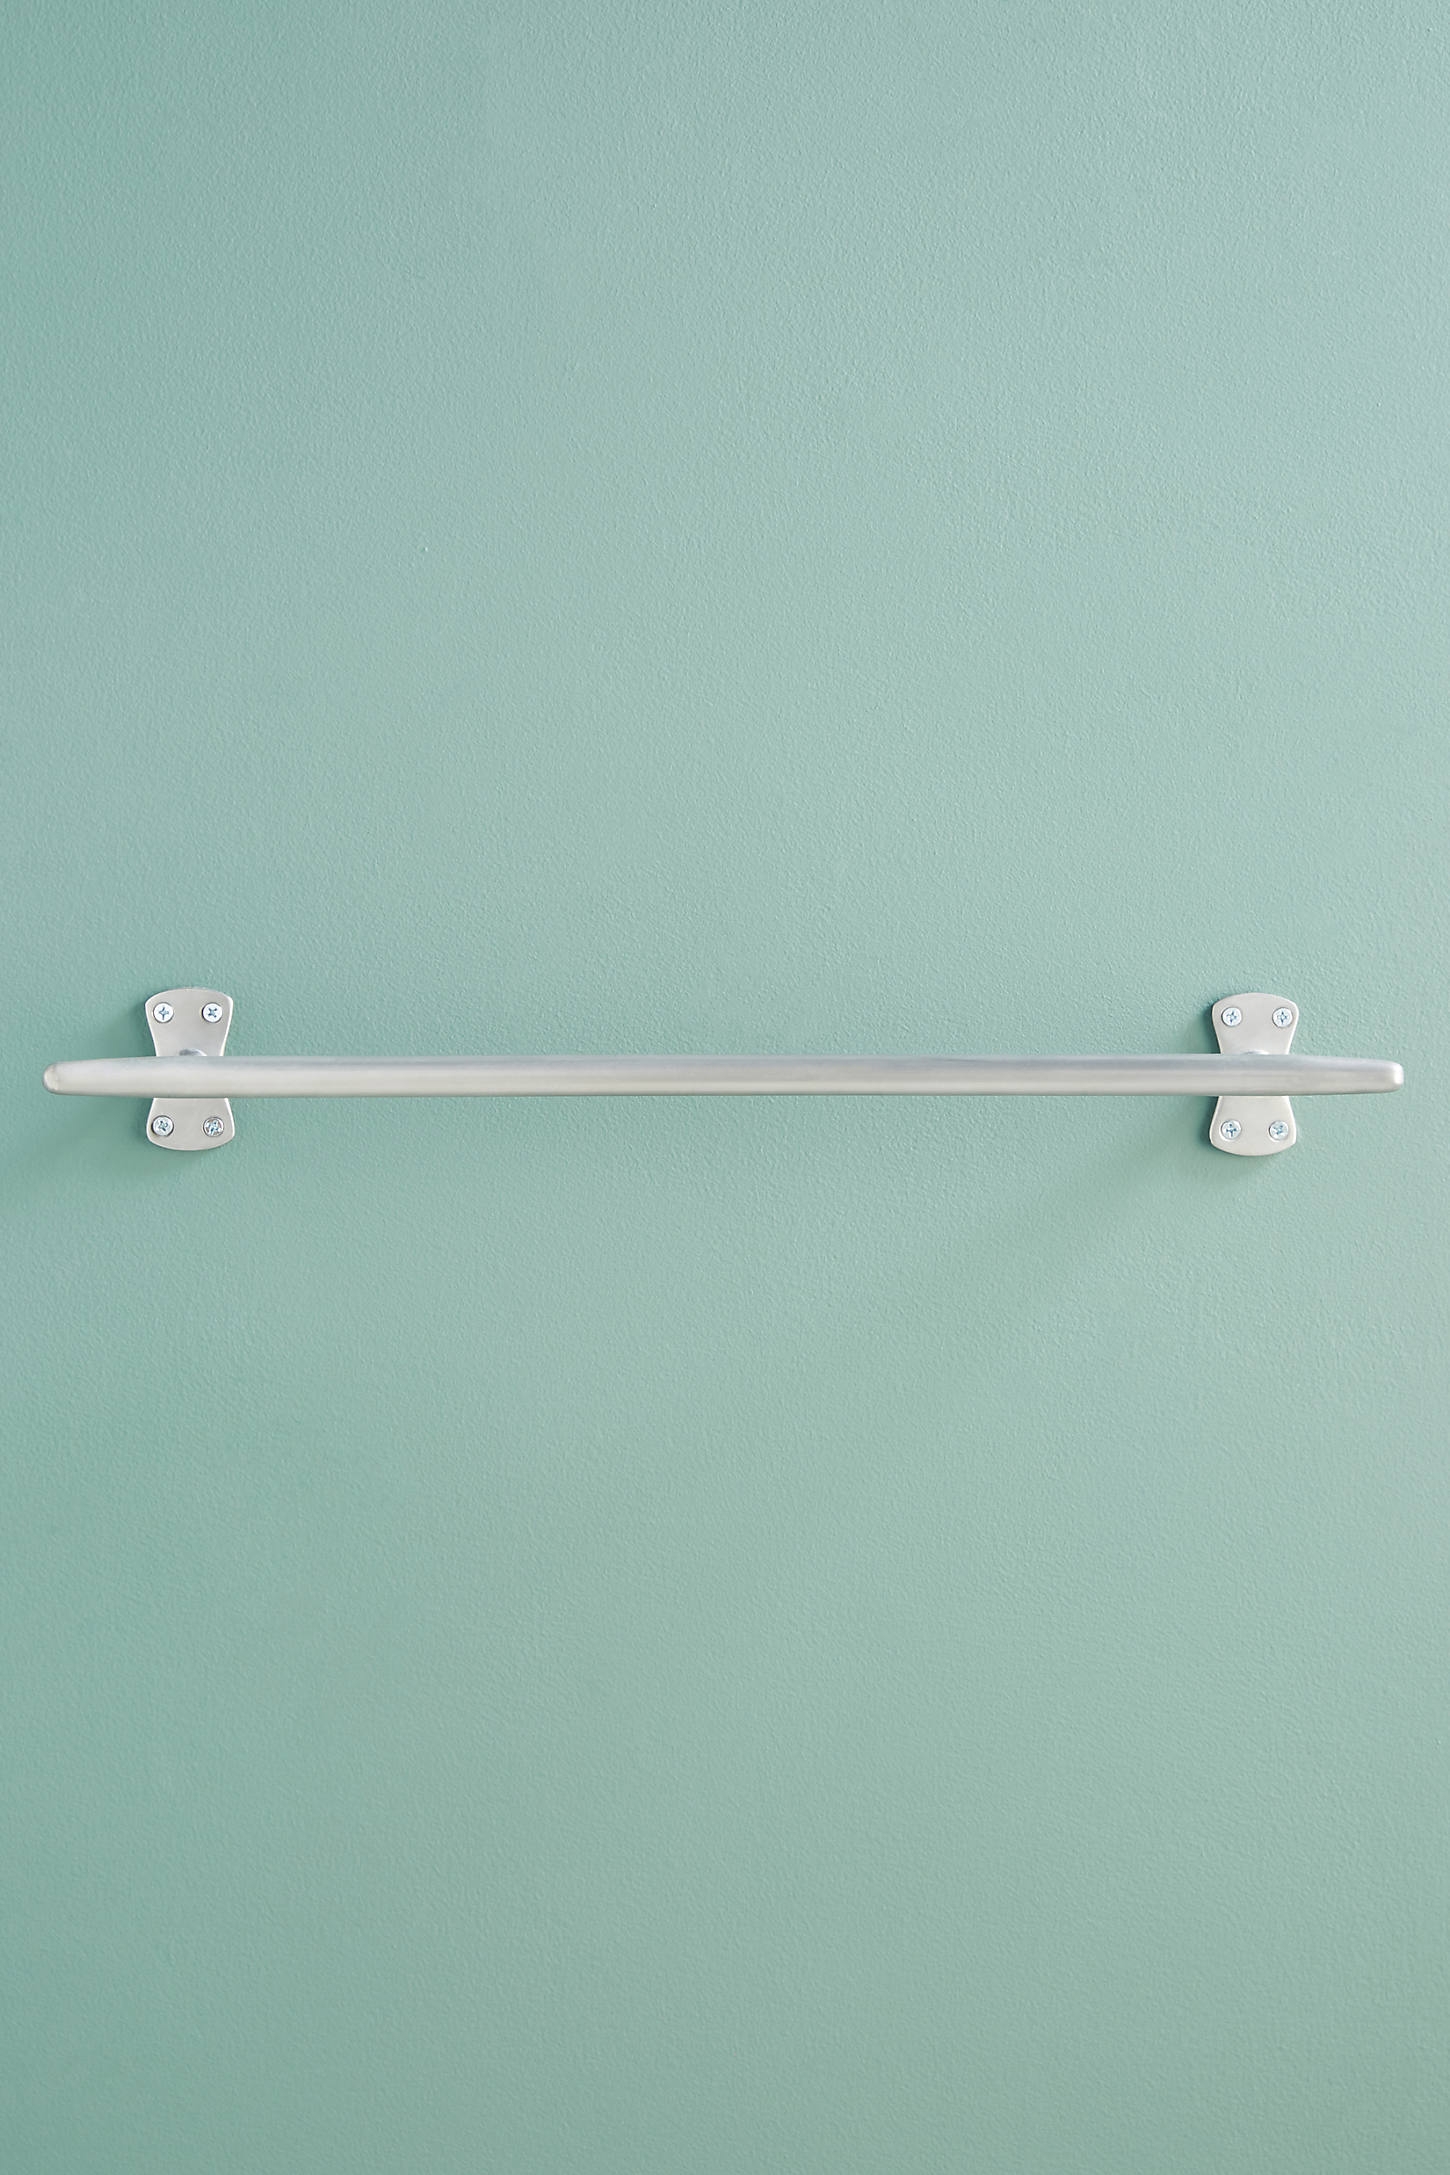 Streamline Towel Bar By Anthropologie in Silver Size S - Image 0